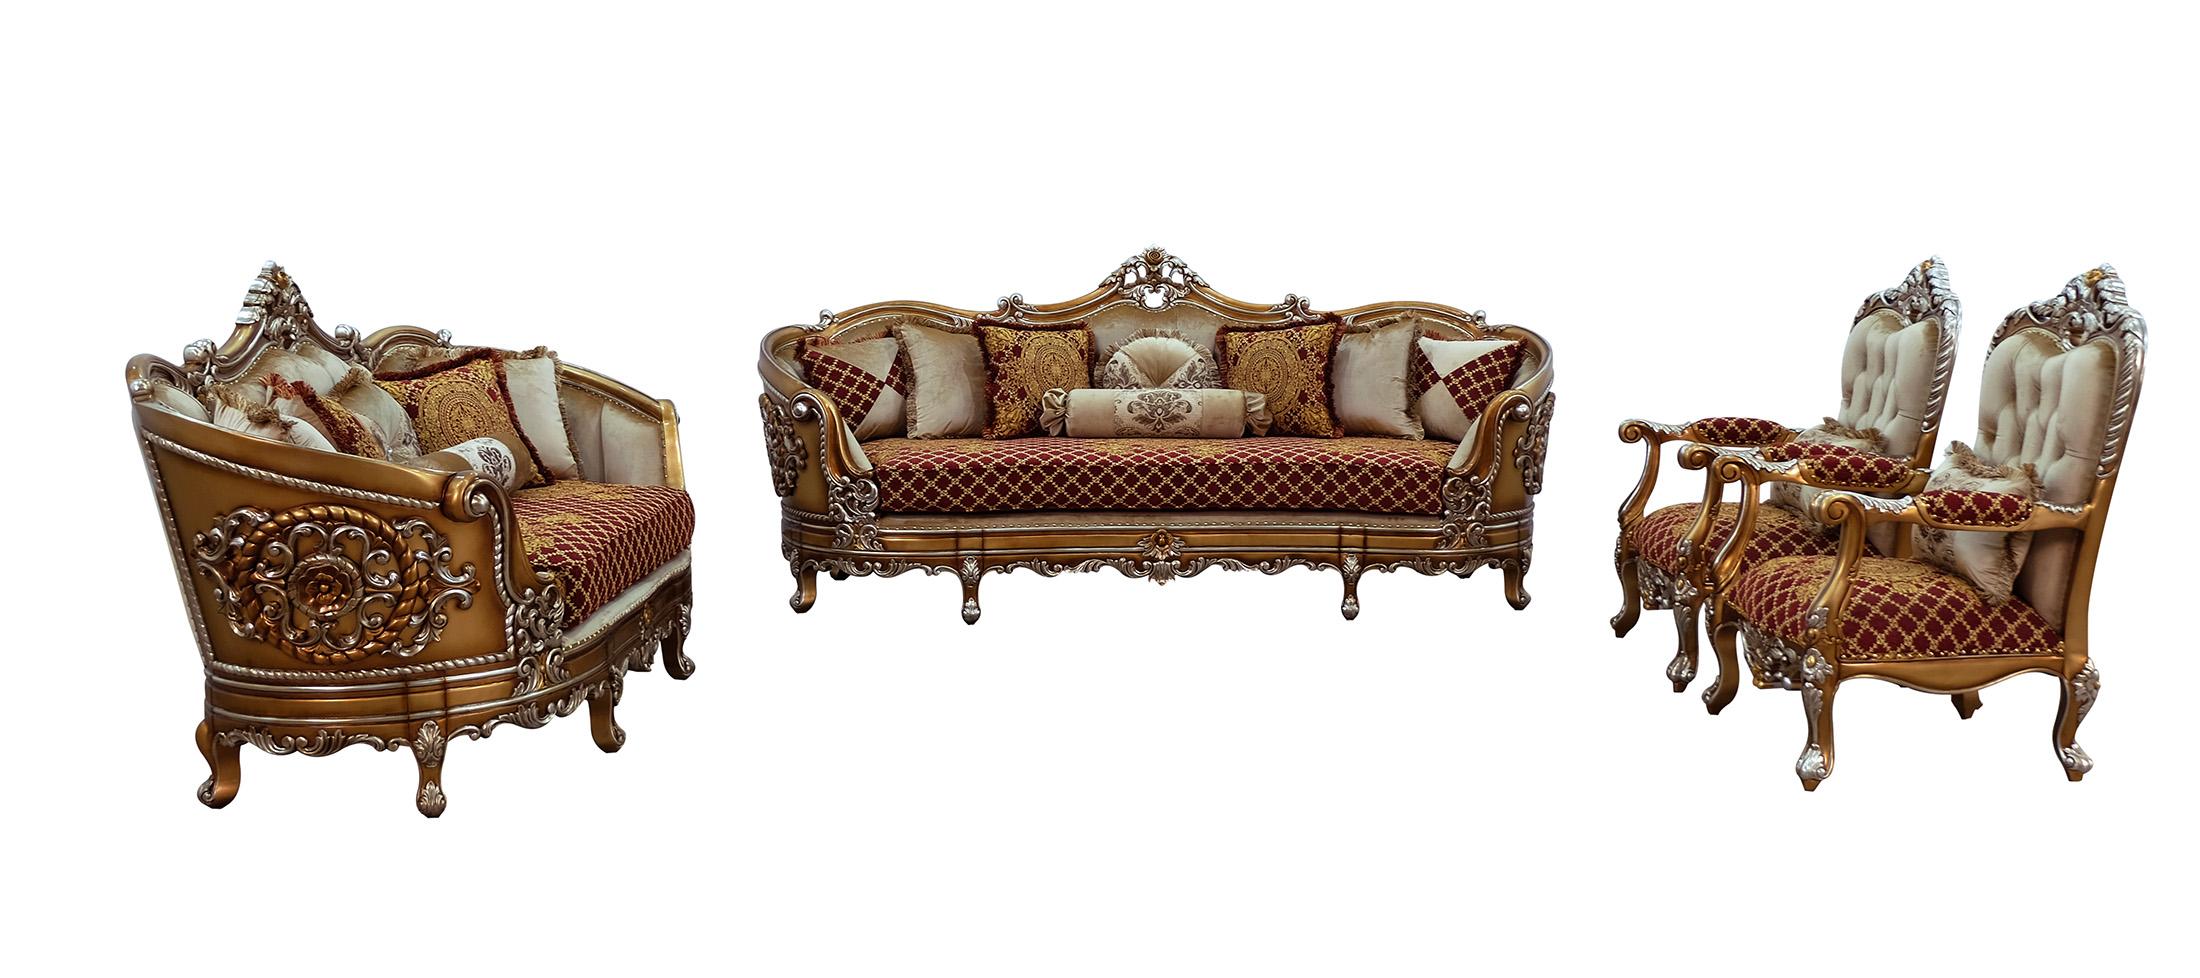 Classic, Traditional Sofa Set SAINT GERMAIN 35554-Set-4 in Sand, Red, Gold Fabric